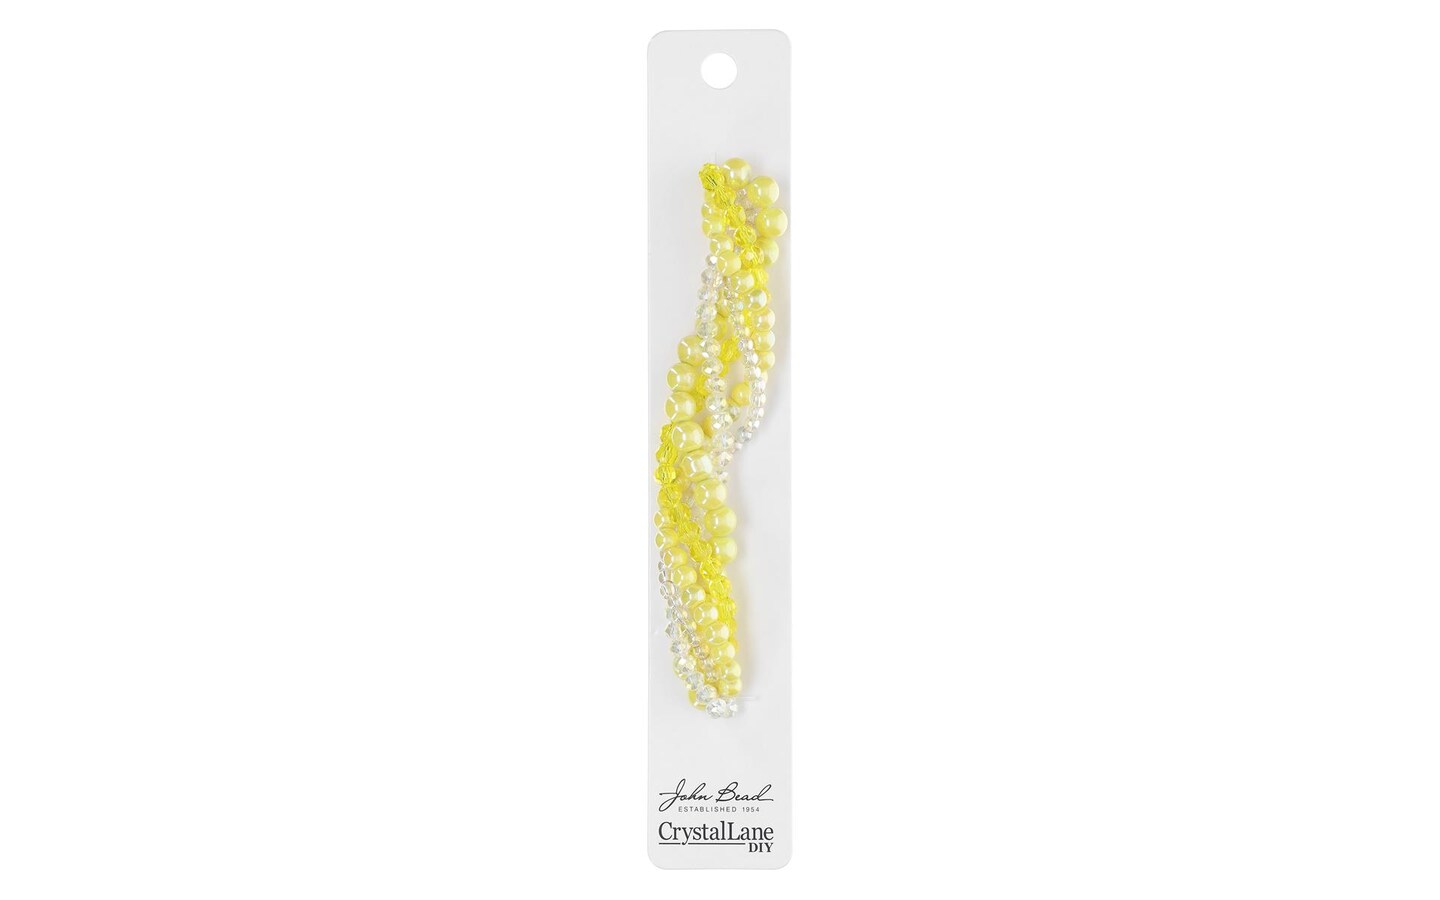 John Bead Crystal Lane Twisted Bead String Yellow Sunlight, 5 strands of beads in 4mm, 6mm, and 8mm, 3 strands round beads, 2 strands unique beads, 6 inches long